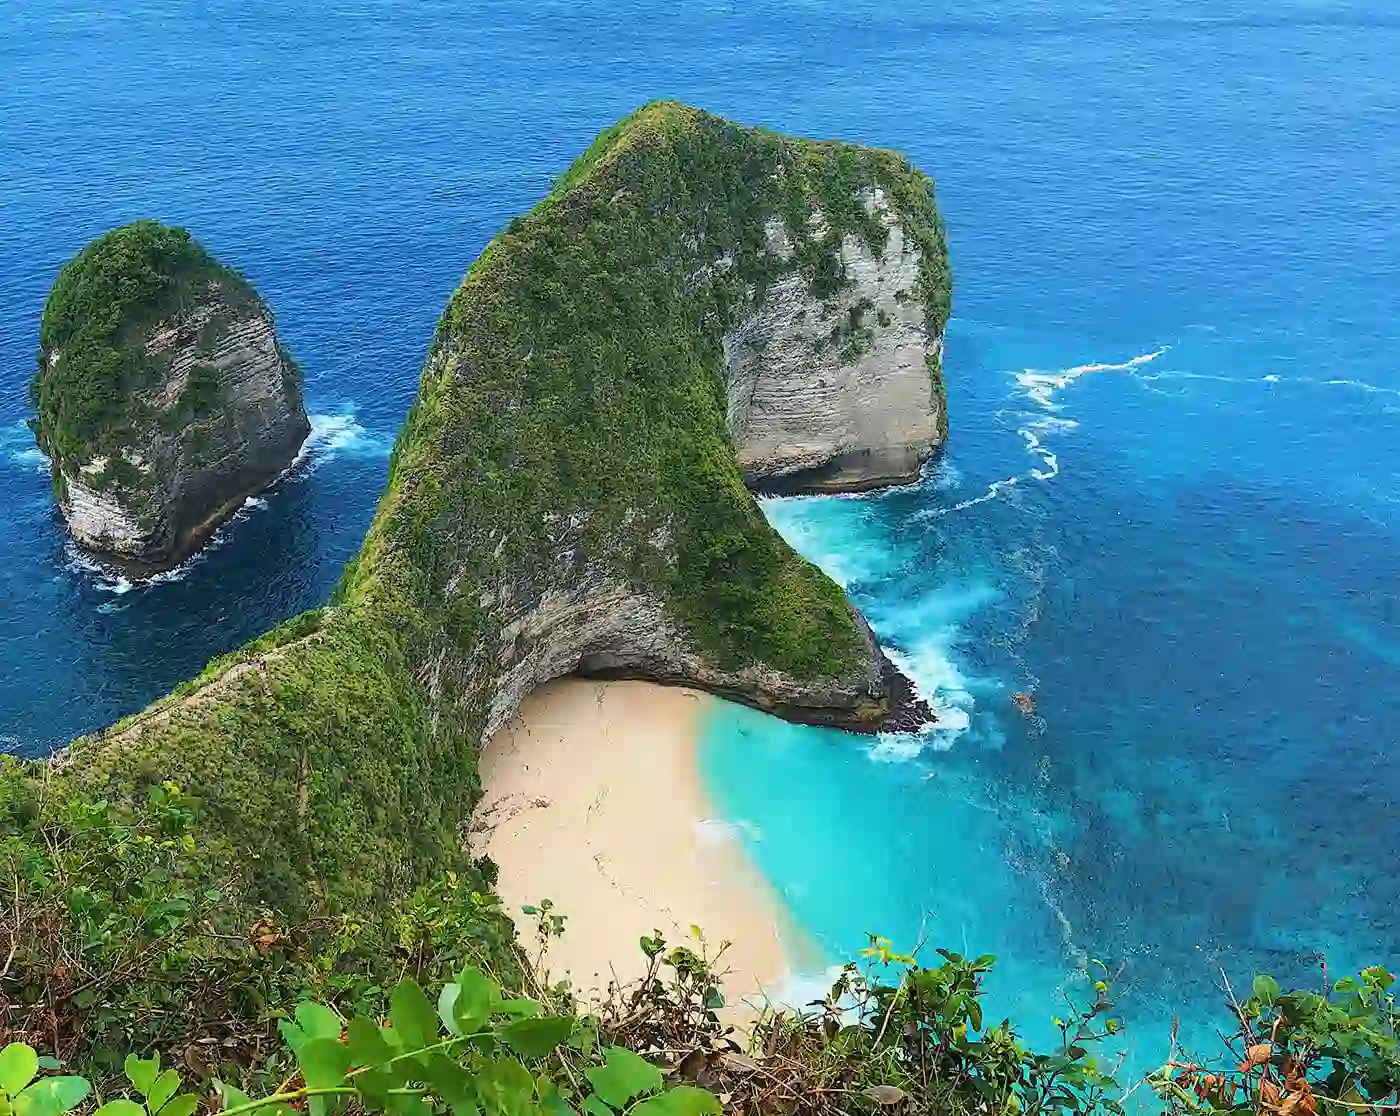 4th Day: Nusa Penida (West Tour) (Vehicle at Disposal Max 12 Hours)